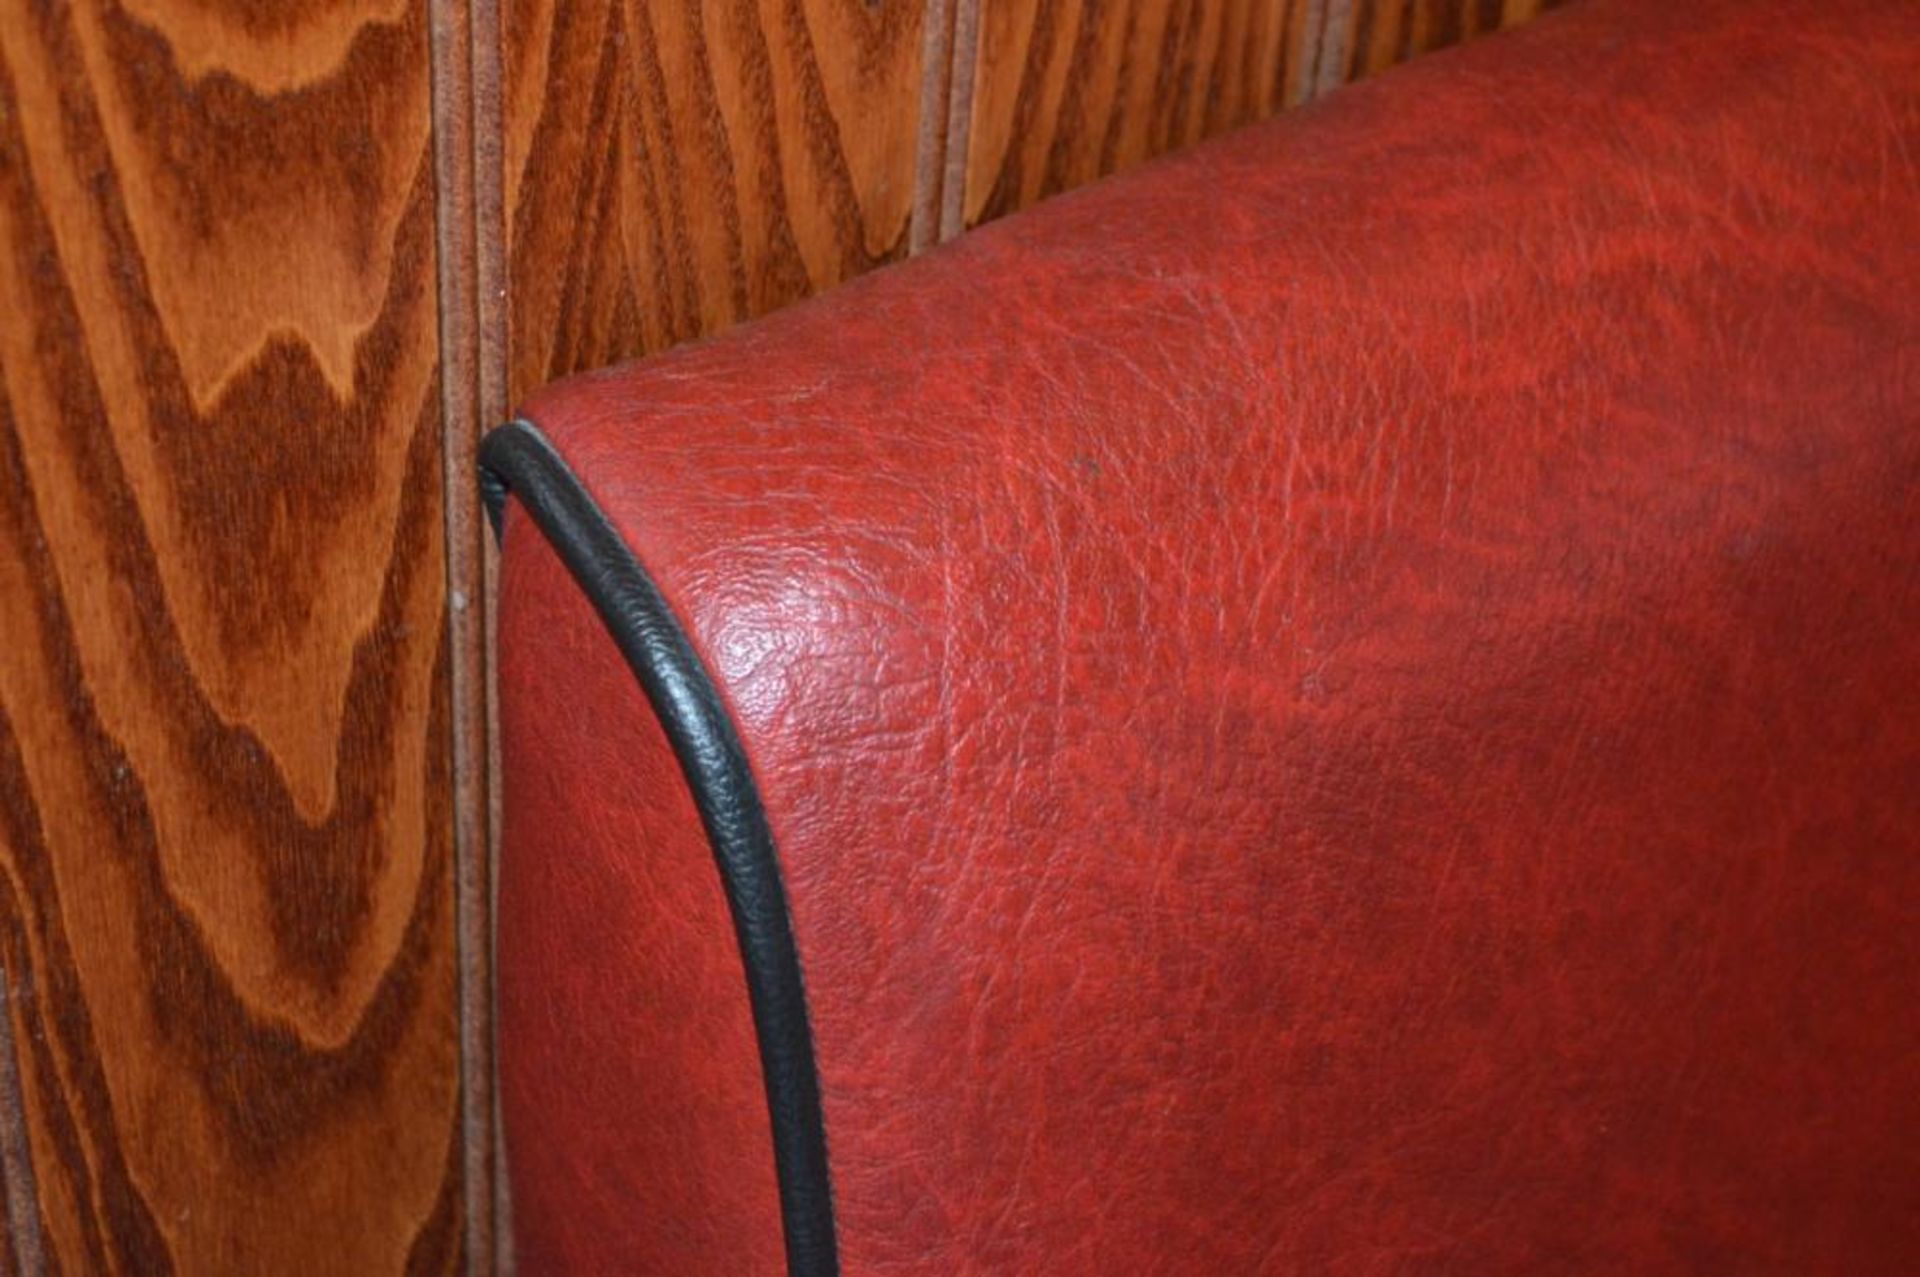 1 x Seating Bench in a 1950's Retro American Diner Design - Upholstered With Red and Cream Faux Leat - Image 3 of 5